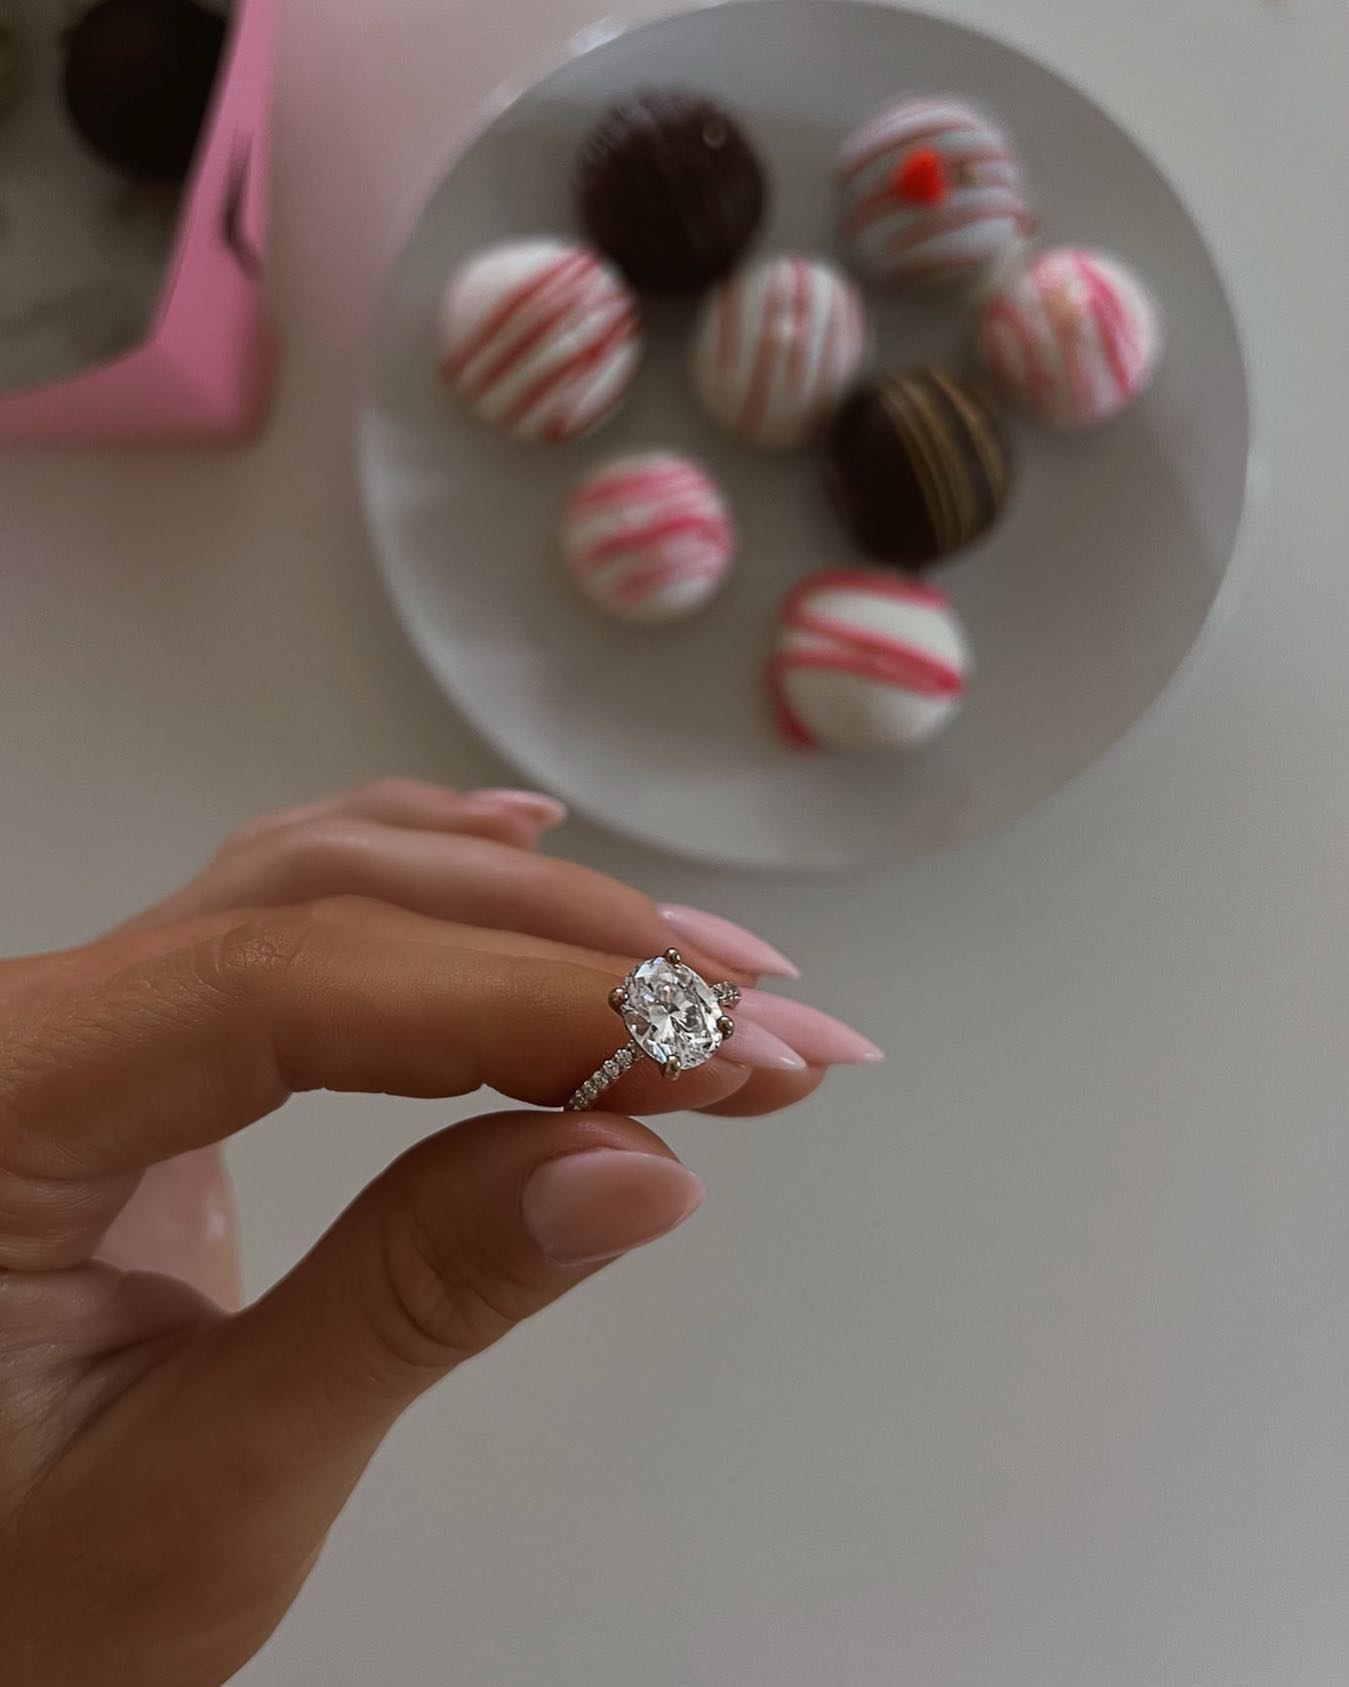 the sweetest treat 💕
💍ring: French Cut Petite Pavé Engagement Ring
.
.
.
#jamesallen #jamesallenrings #diamond #diamonds #diamondring #engaged #engagement #engagementring #isaidyes #ringinspo #winter #winterstyle #winterengagement #valentine #valentinesday #valentinesdaysale #valentinesdayjewelry